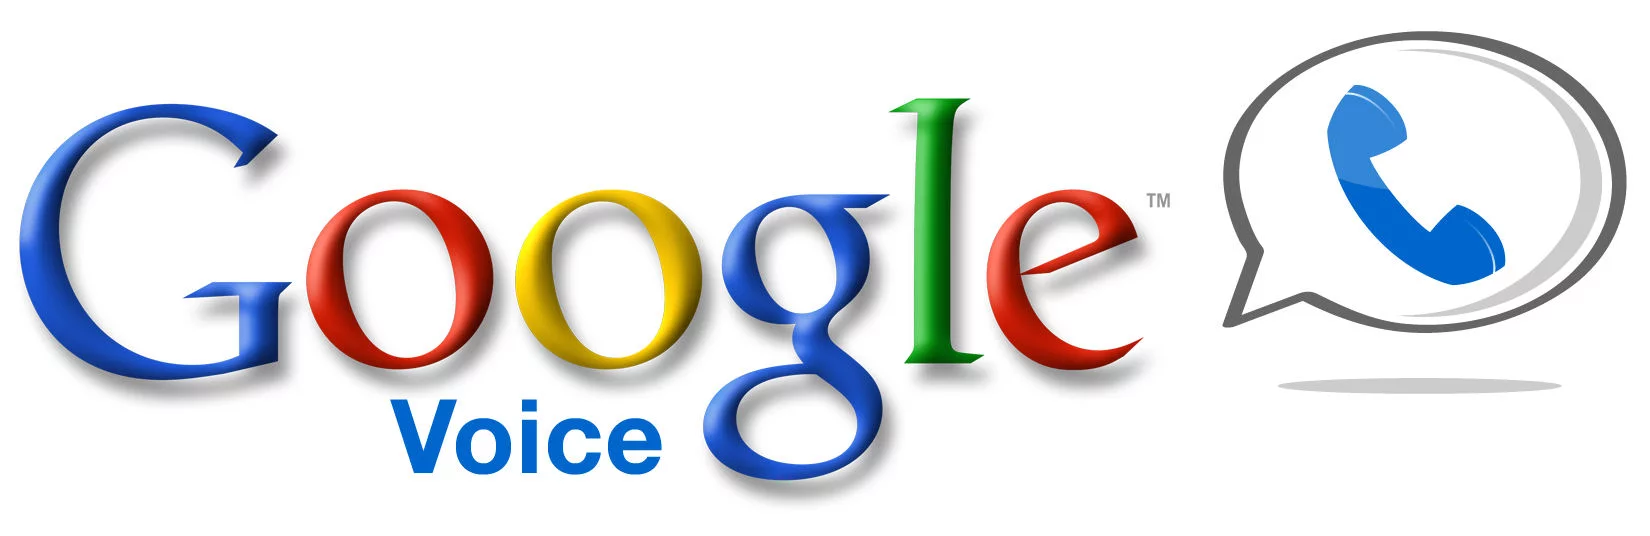 Google Voice Logo - for some reason we don't have an alt tag here